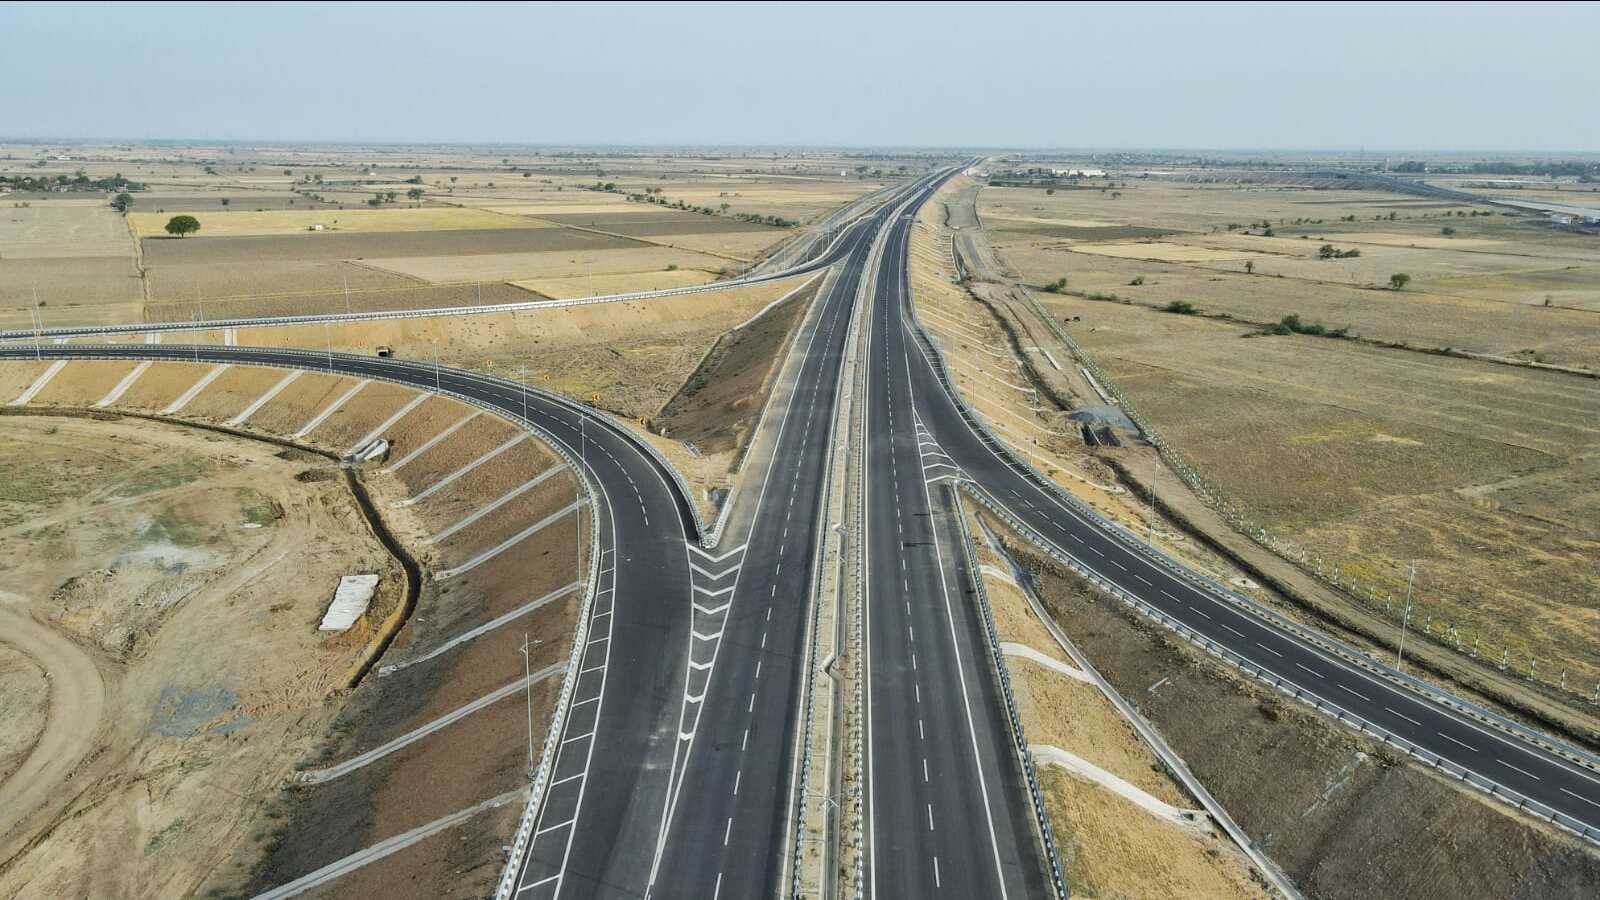 PM Modi likely to inaugurate Bundelkhand expressway in second week of July  - Hindustan Times